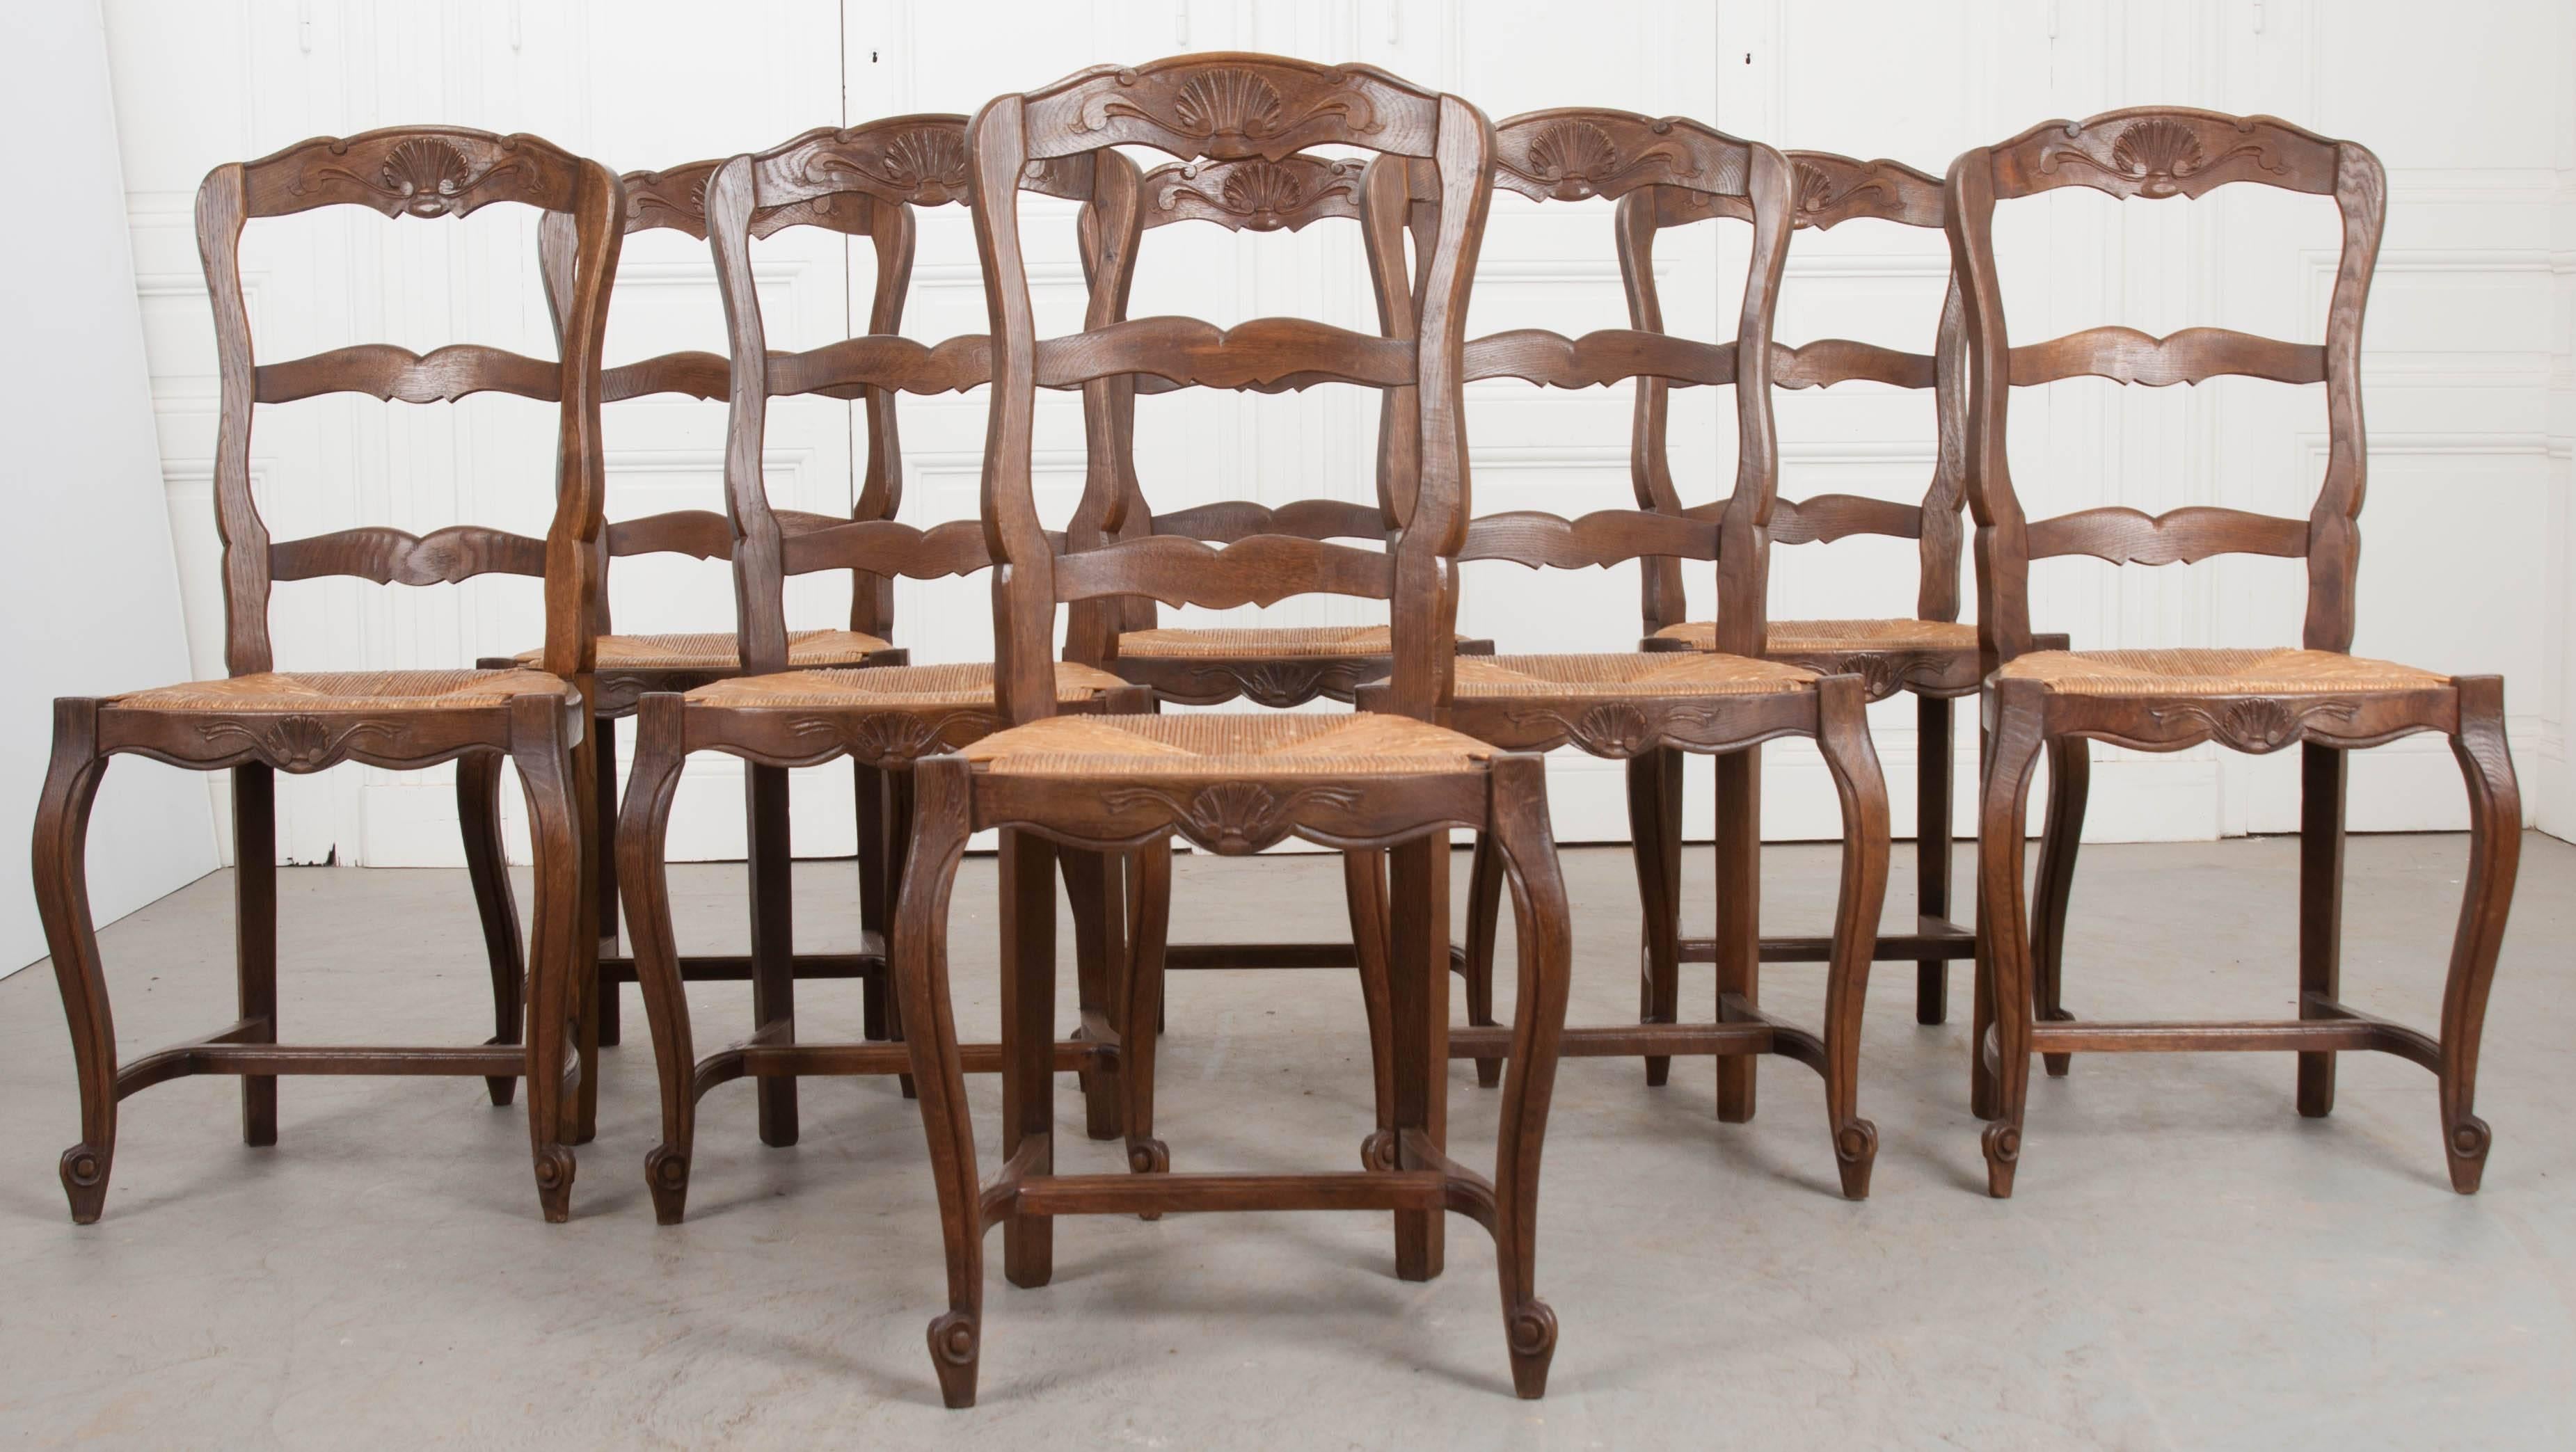 A set of eight Provincial style oak ladder back dining chairs, with rush seats, from France. This set was made in the 1930s and are in wonderful condition. The top and shaped front rails are each emblazoned with beautifully carved shell cartouches.